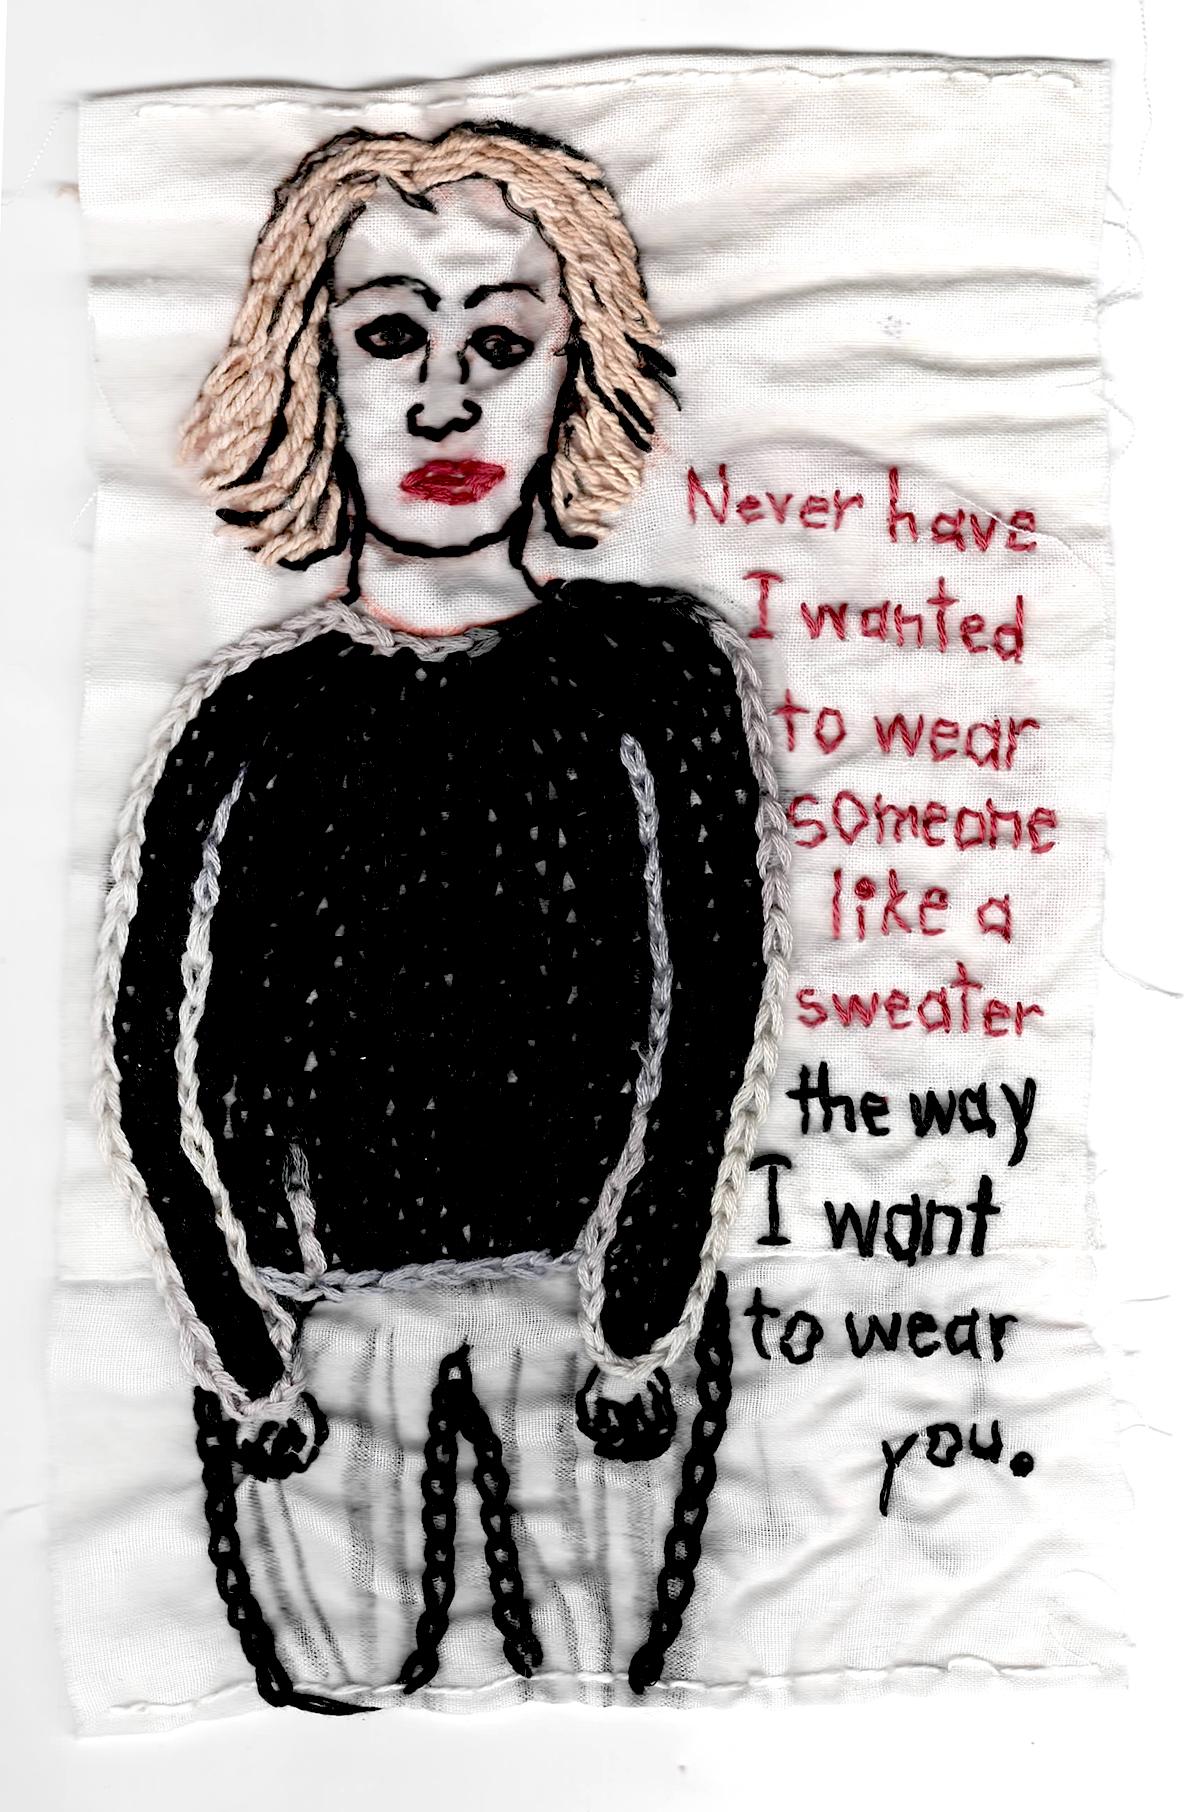 Sweater - love narrative embroidery on fabric with woman